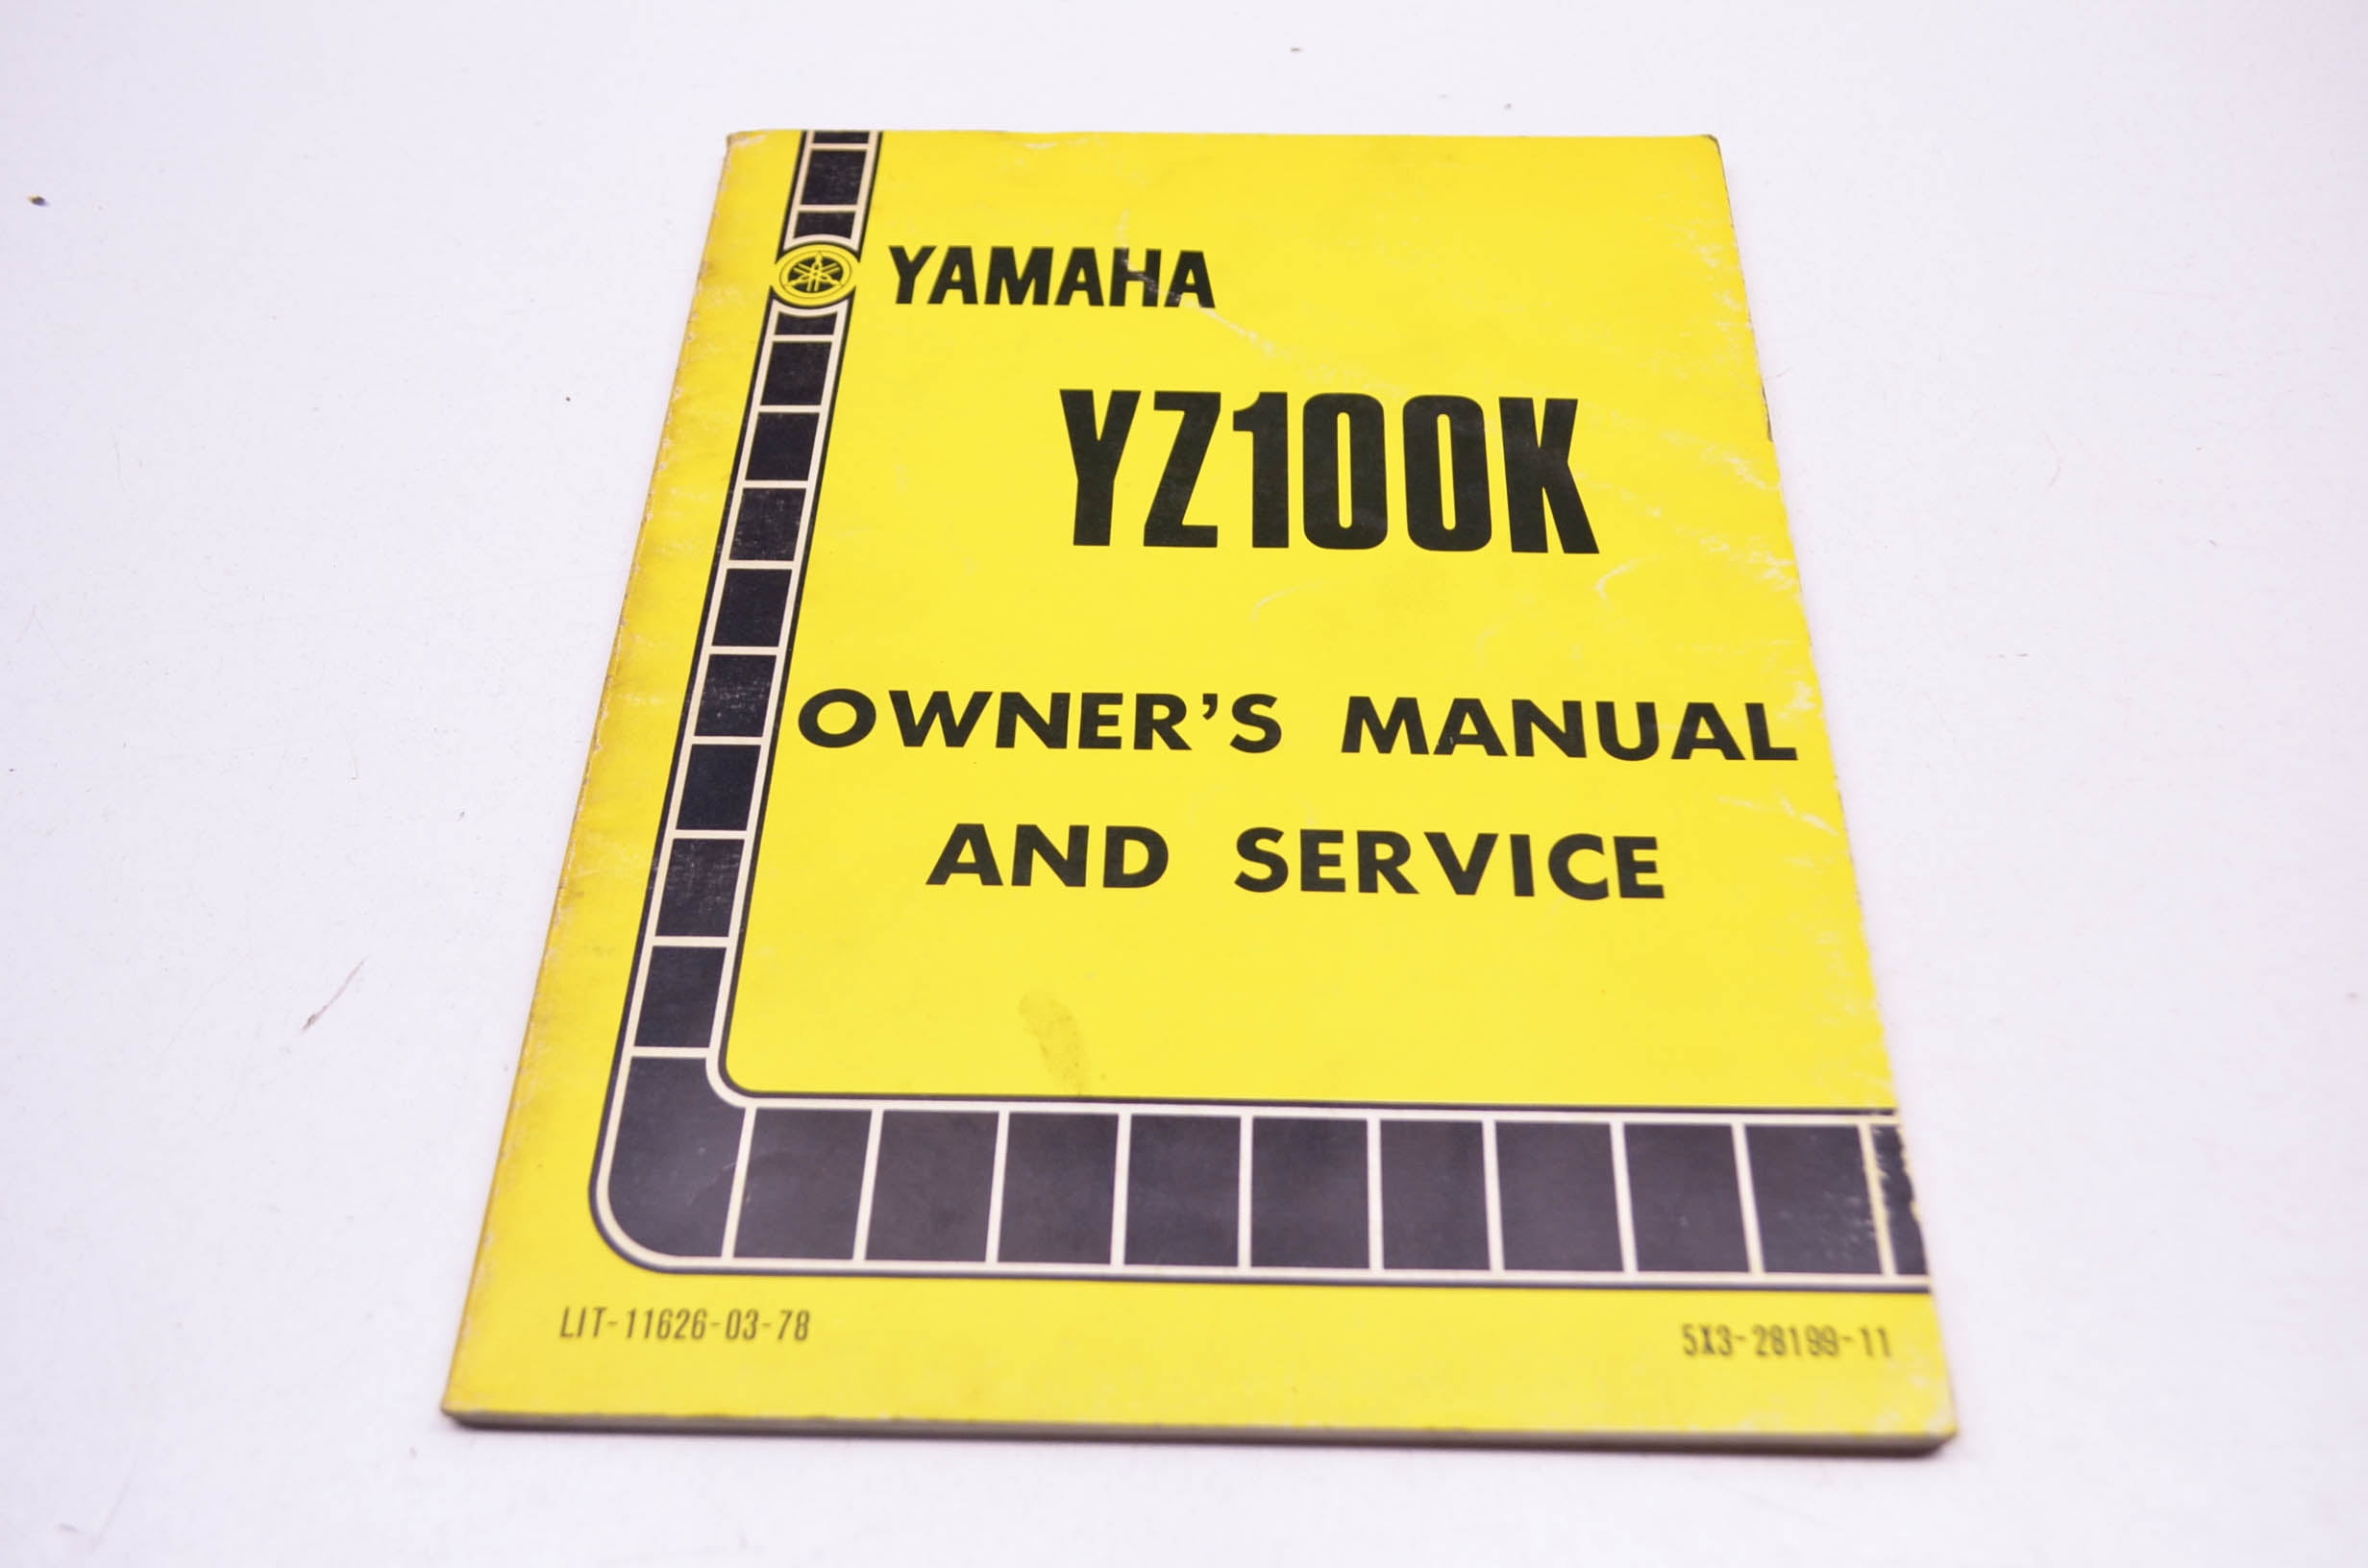 Yamaha FACTORY YZ100K OWNER'S AND Service Repair Shop Manual LIT-11626-03-78 